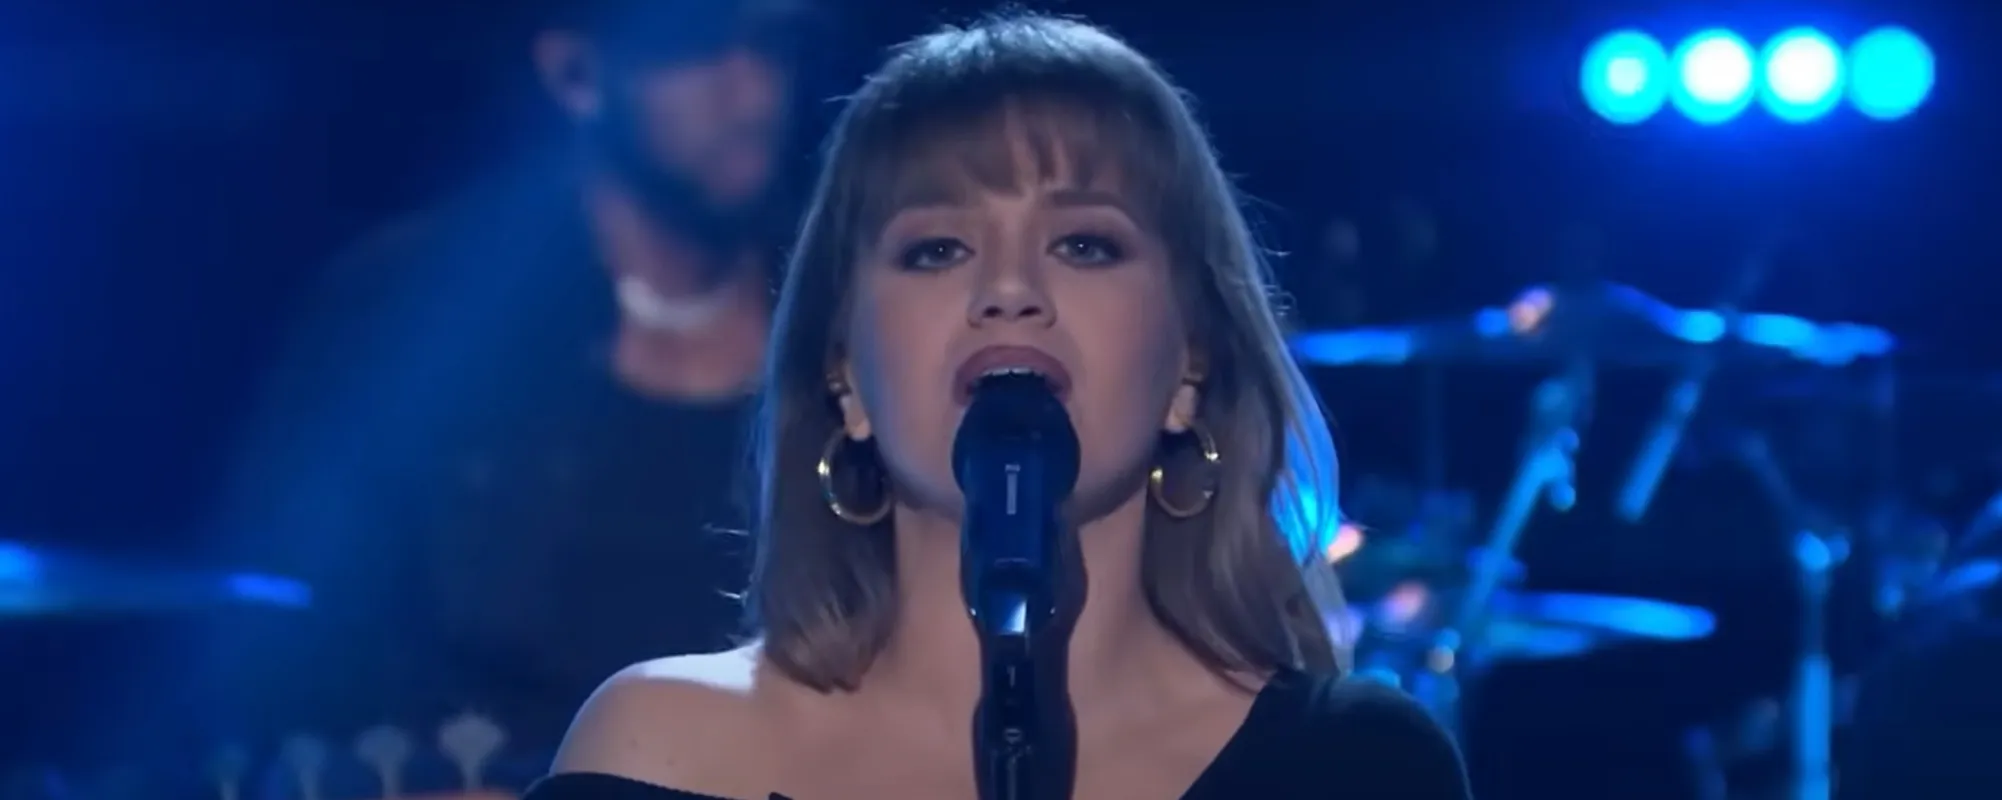 Kelly Clarkson Just Smashed Yet Another Cover, Leaving Fans Begging for a Post Malone Duet